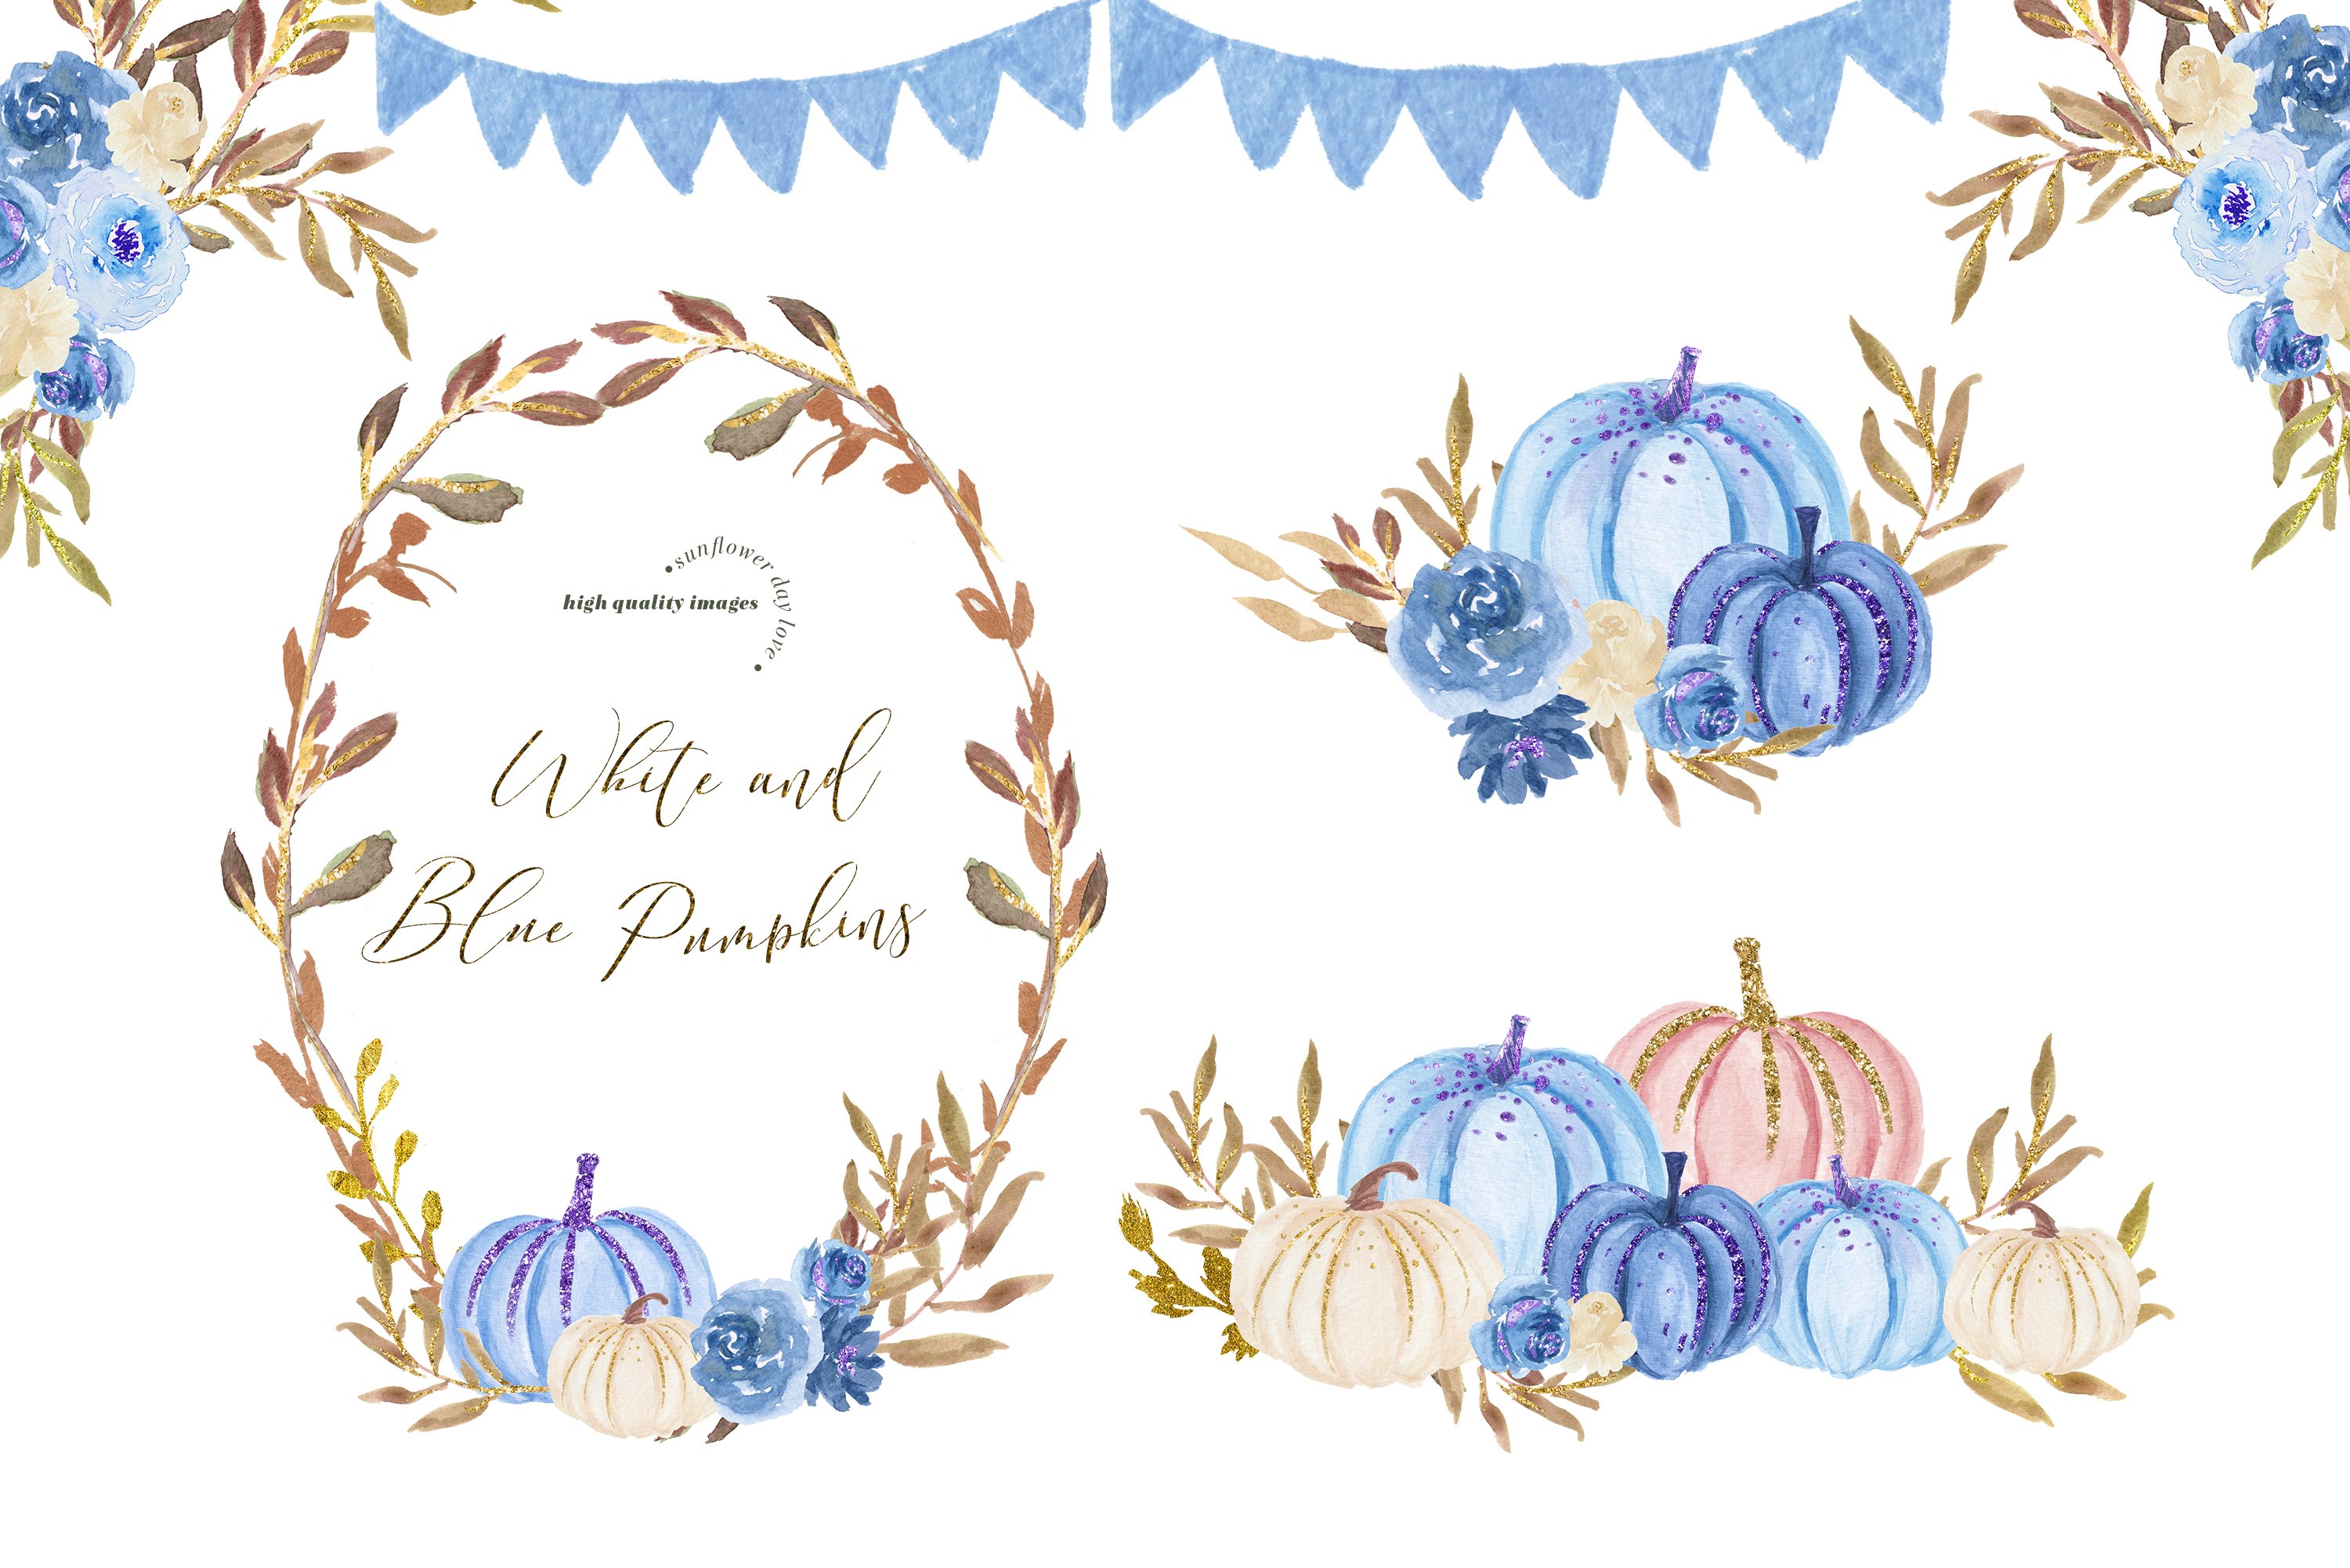 Creative frame with flowers and blue pumpkins.